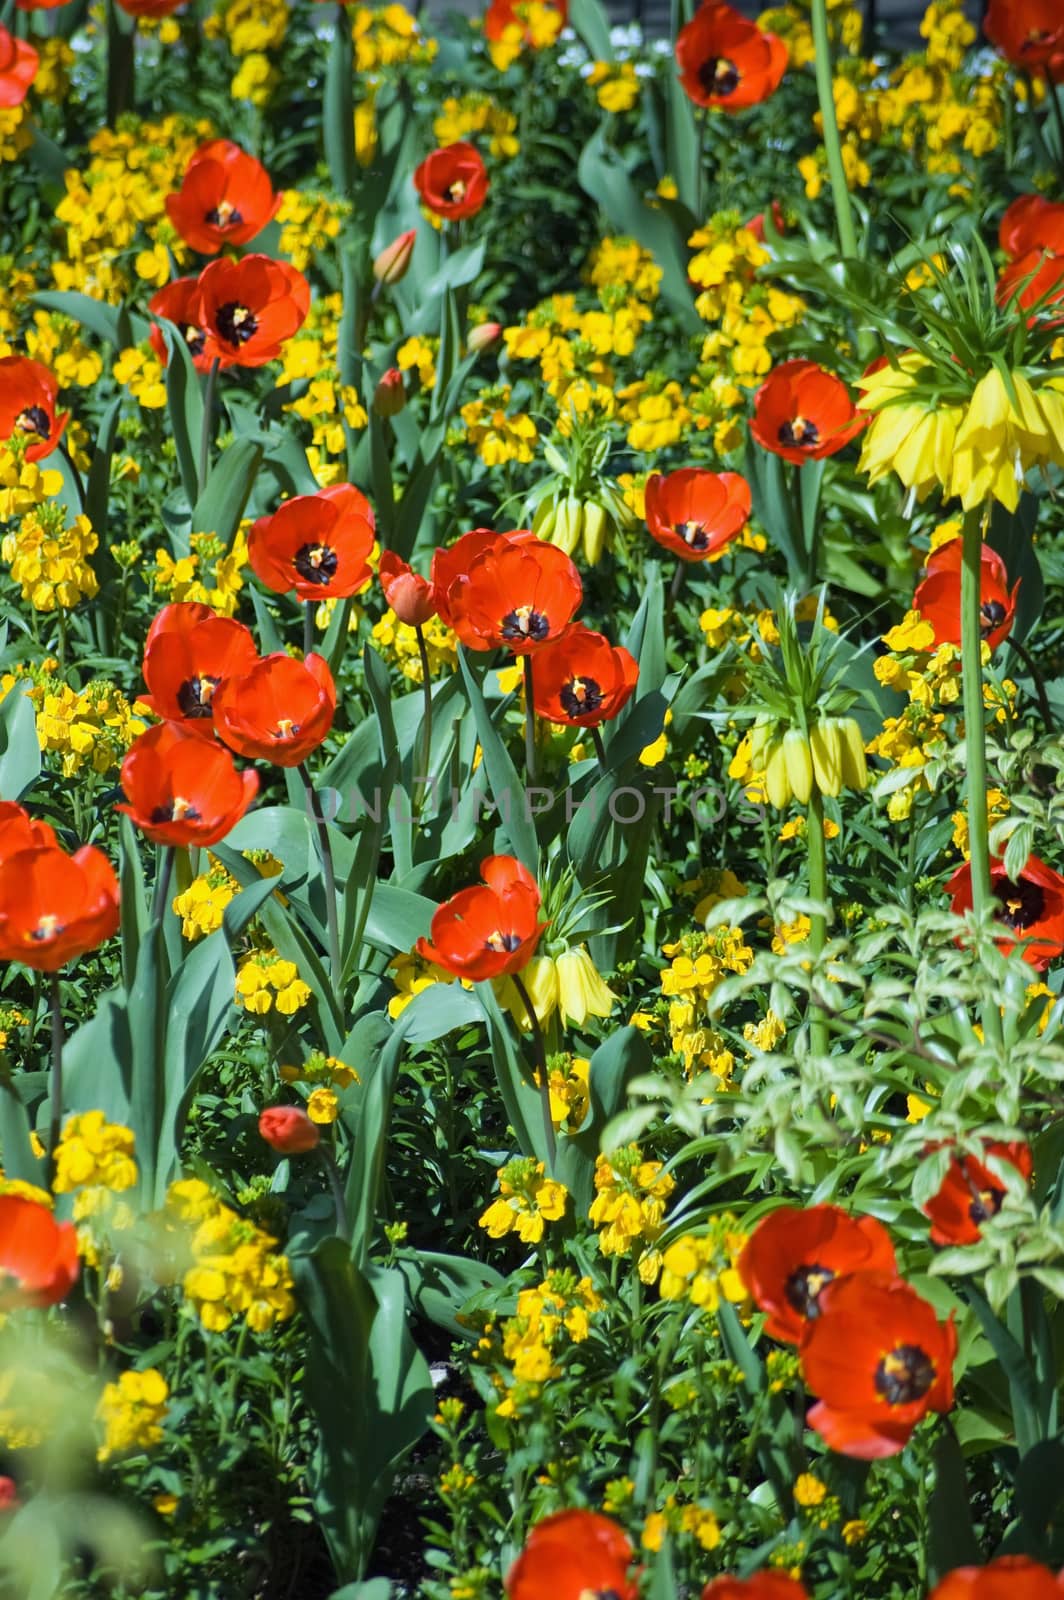 A spring flower bed with red and yellow blooms including tulips and wallflowers.